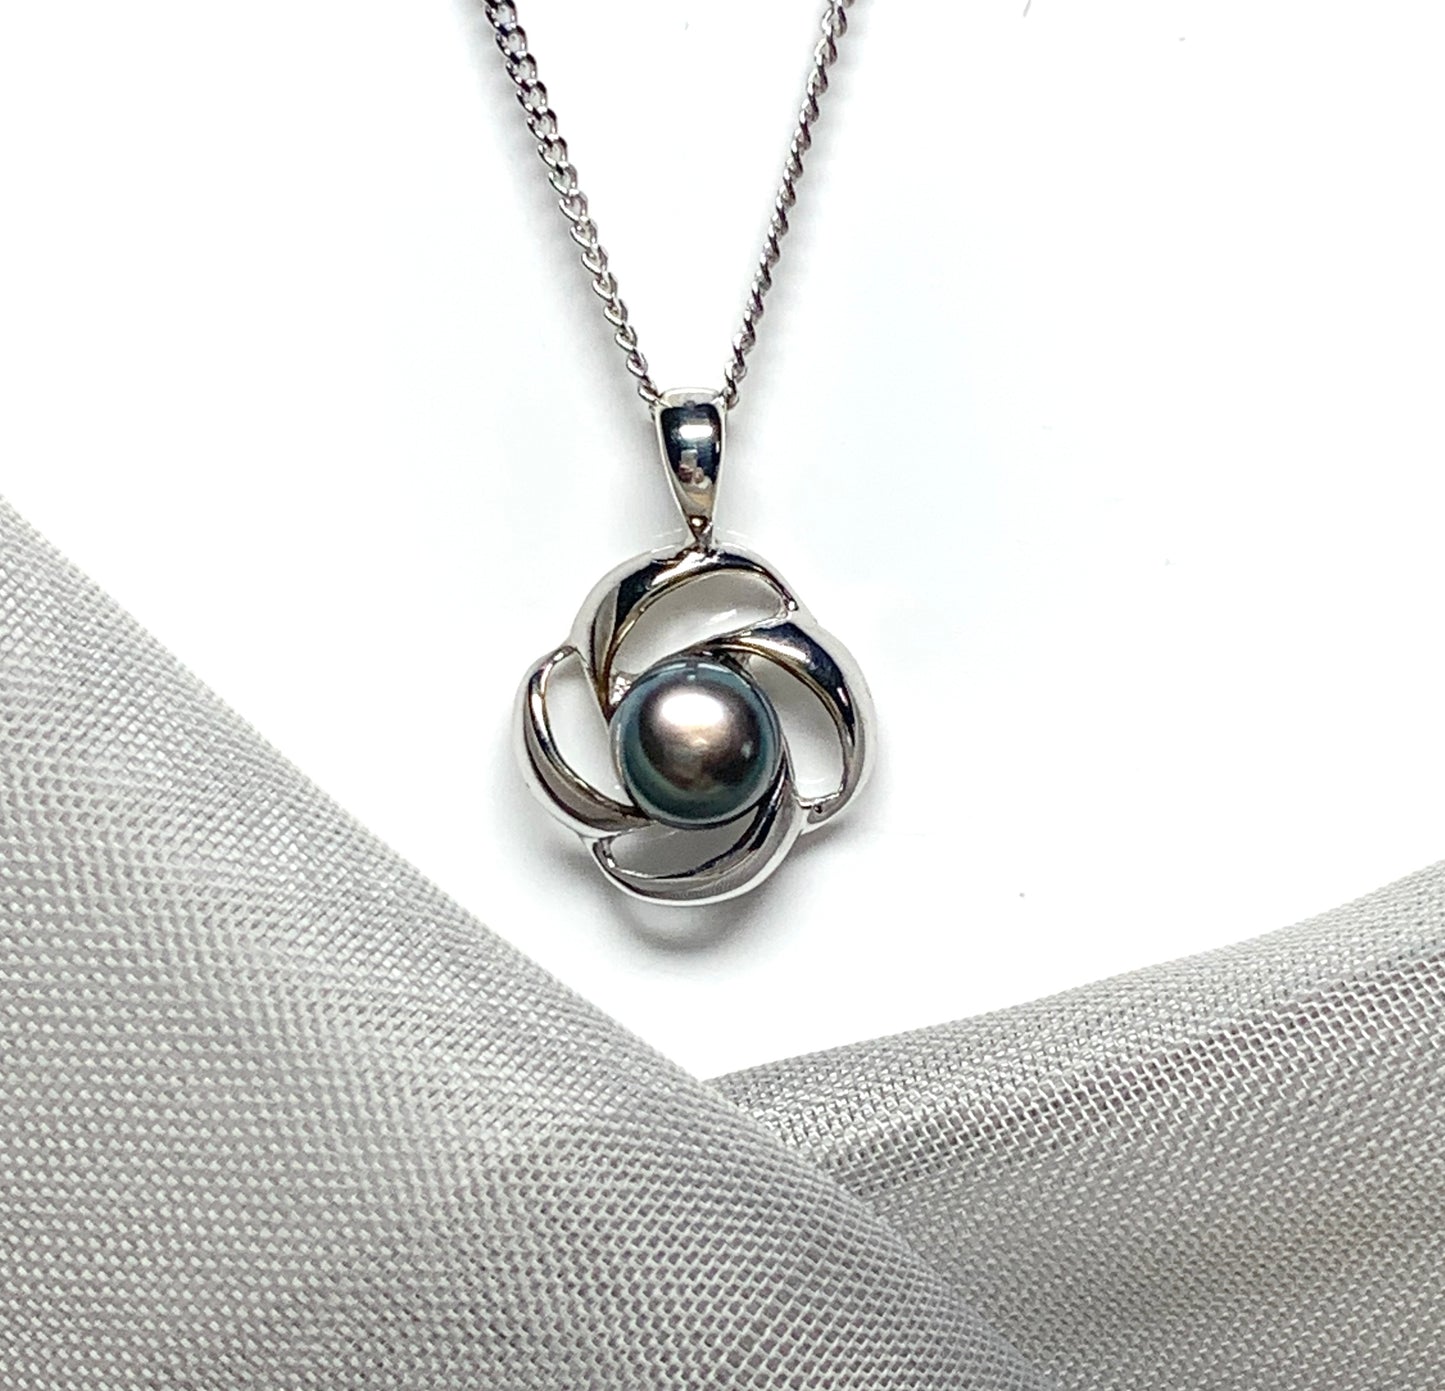 Black grey pearl necklace white gold pendant